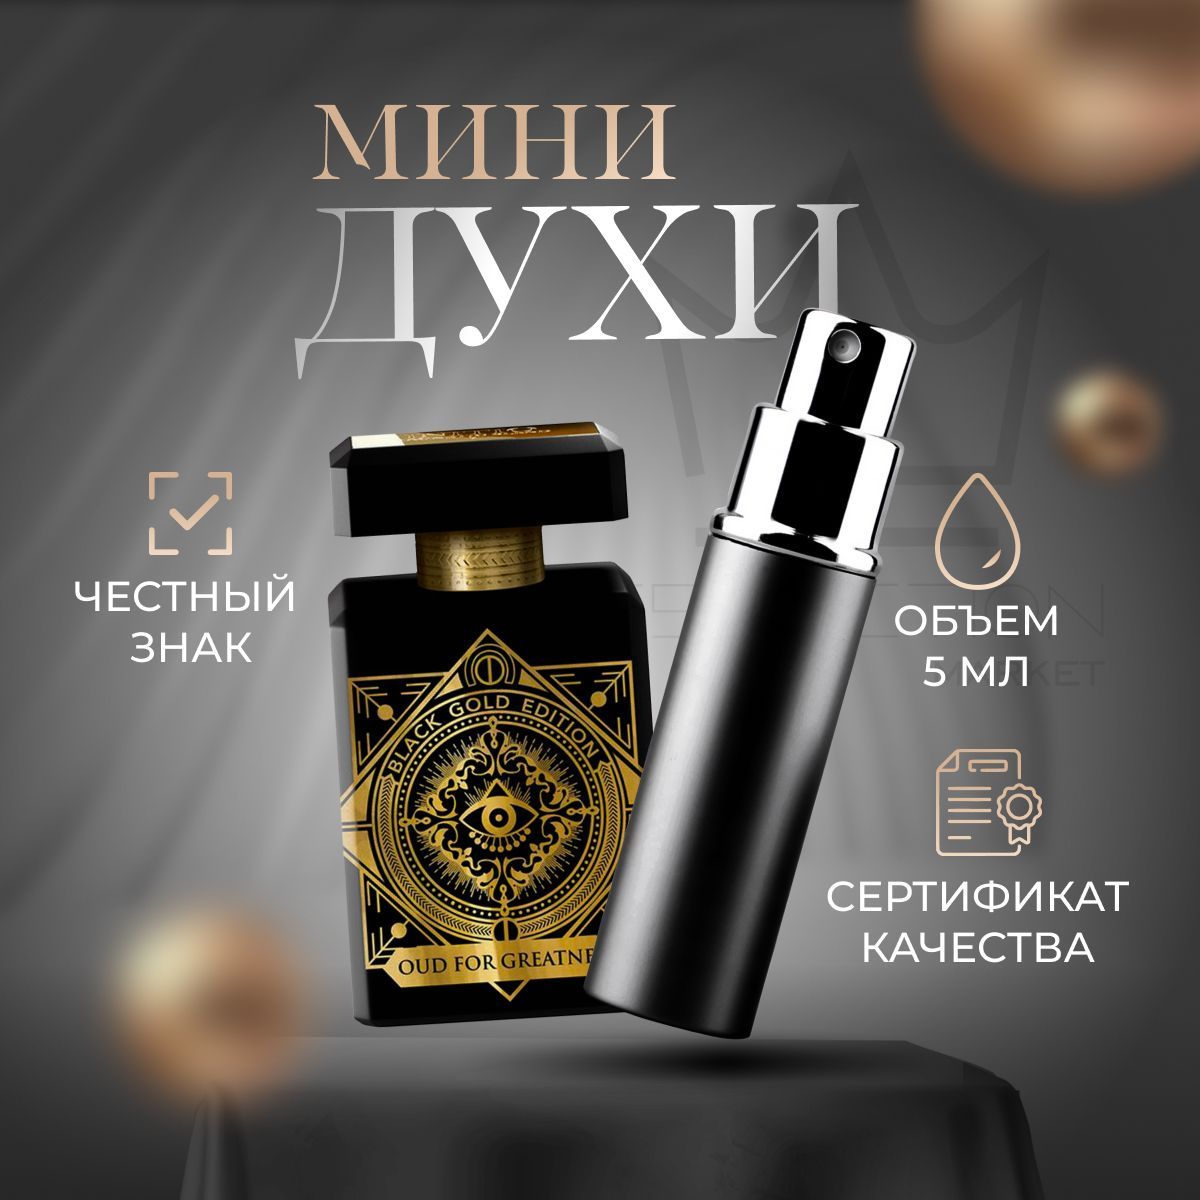 Инитио парфюм отзывы. Initio Parfums prives oud for Greatness. Initio oud for Greatness. Тестер Initio oud for Greatness 65мл.